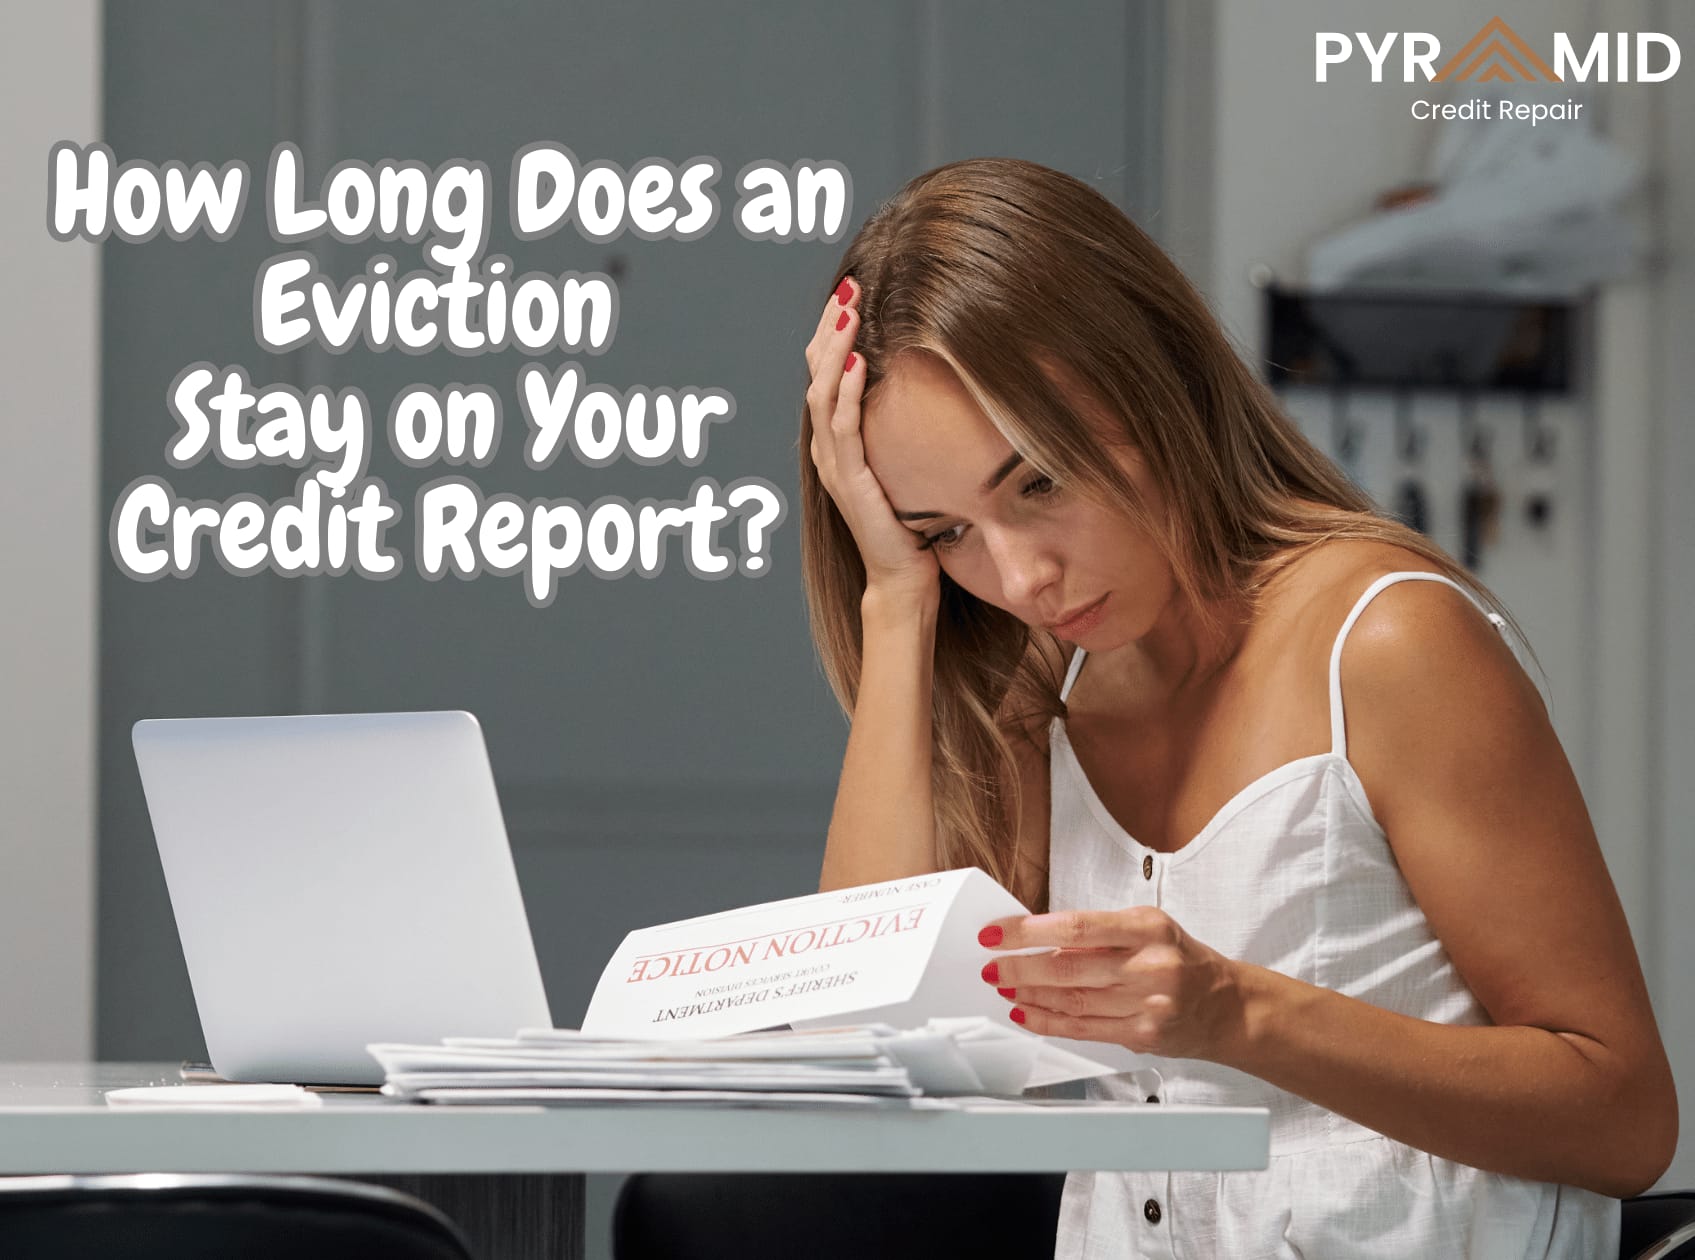 How Long Does an Eviction Stay on Your Credit Report